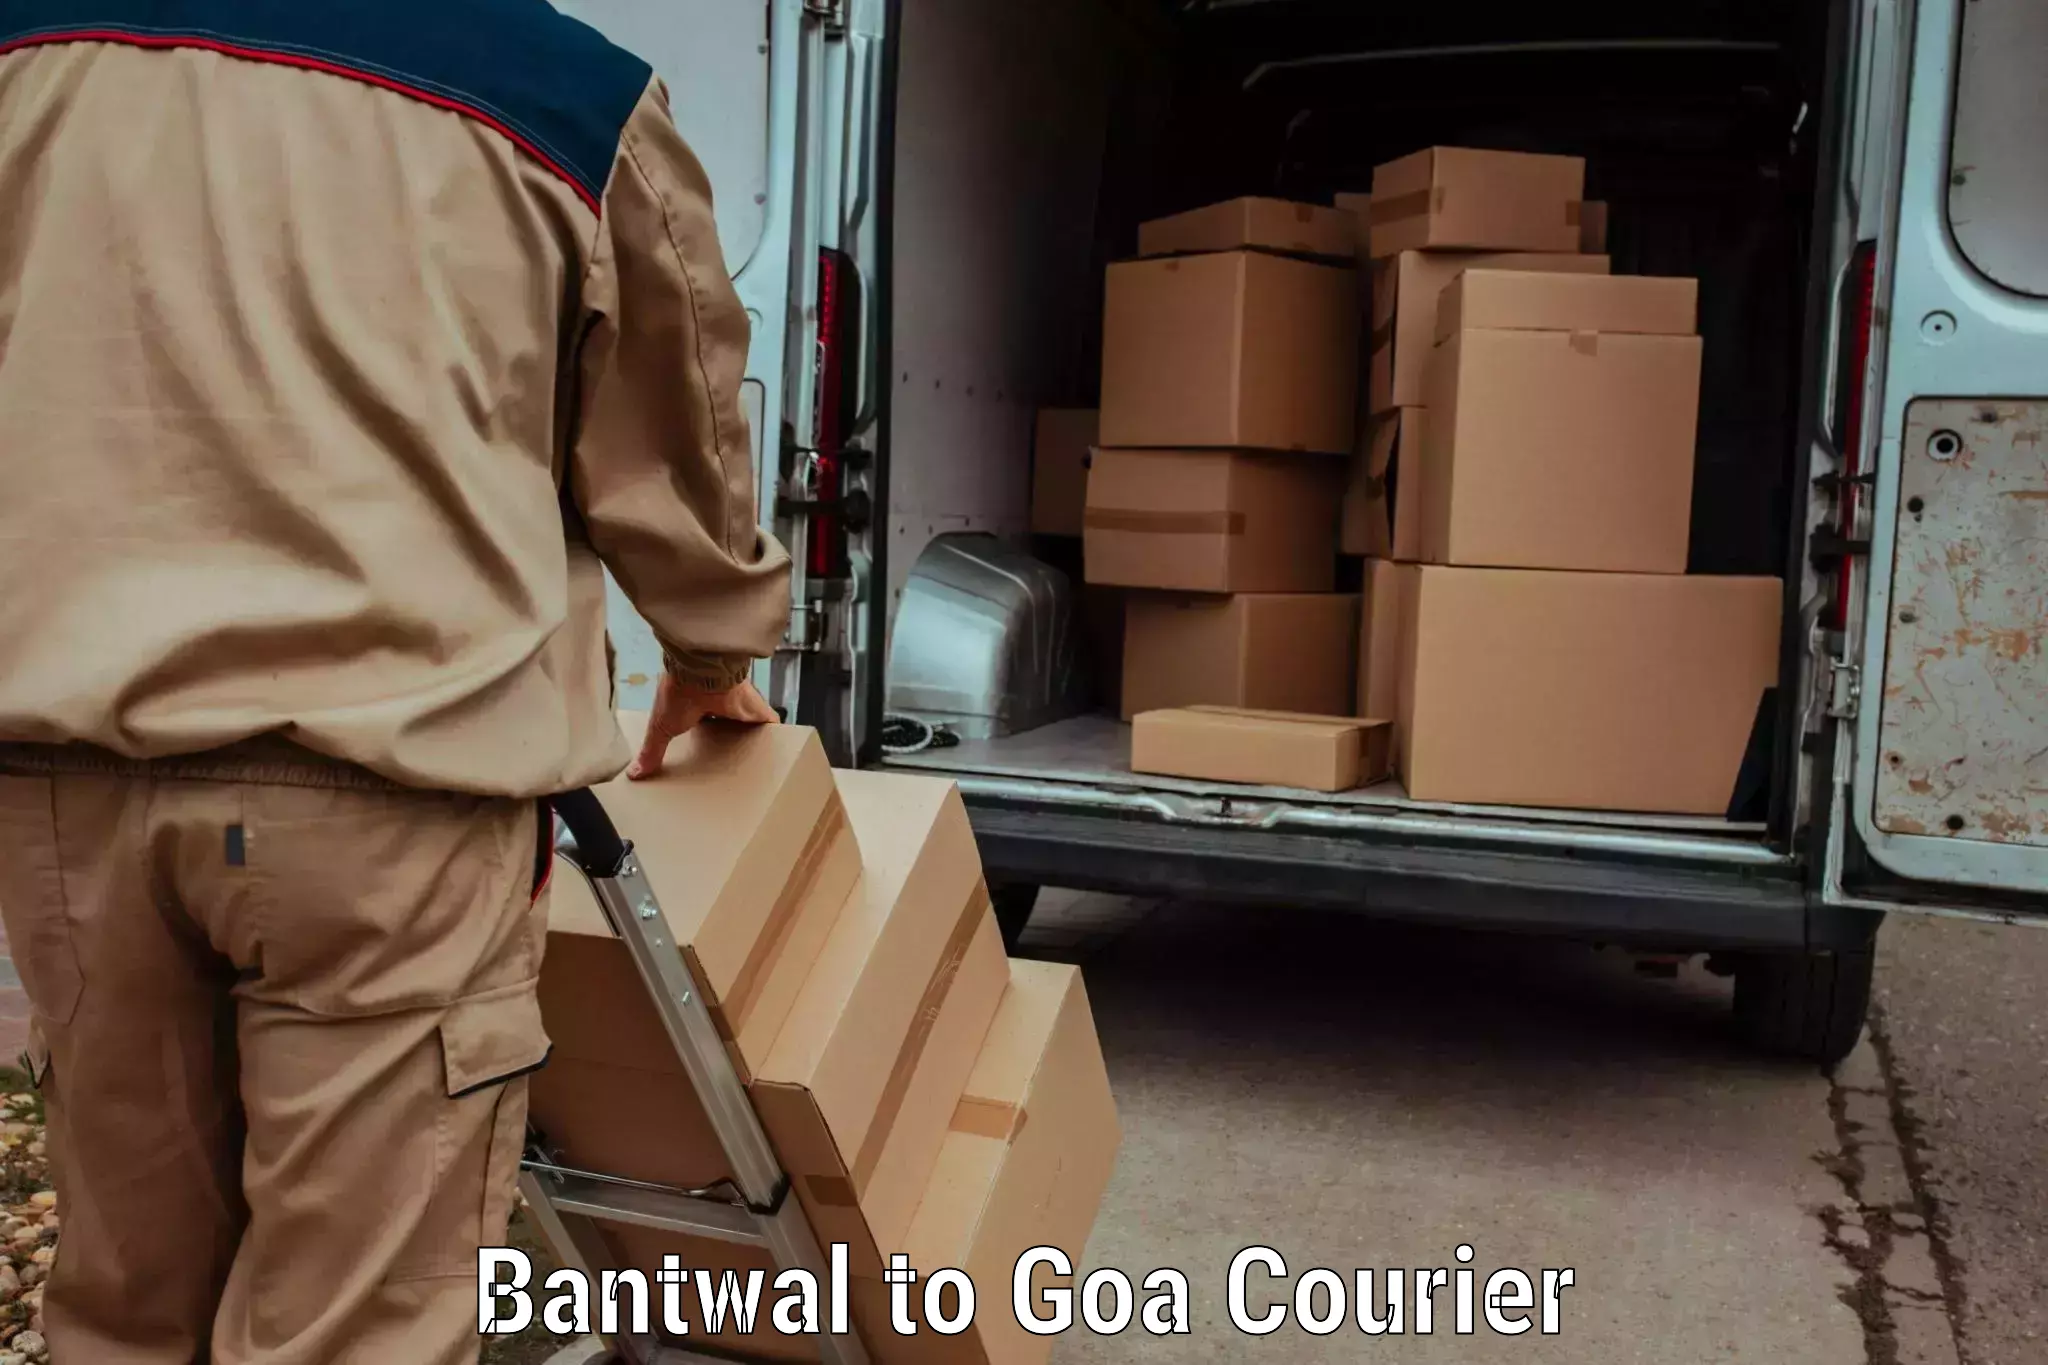 Luggage transport company Bantwal to Goa